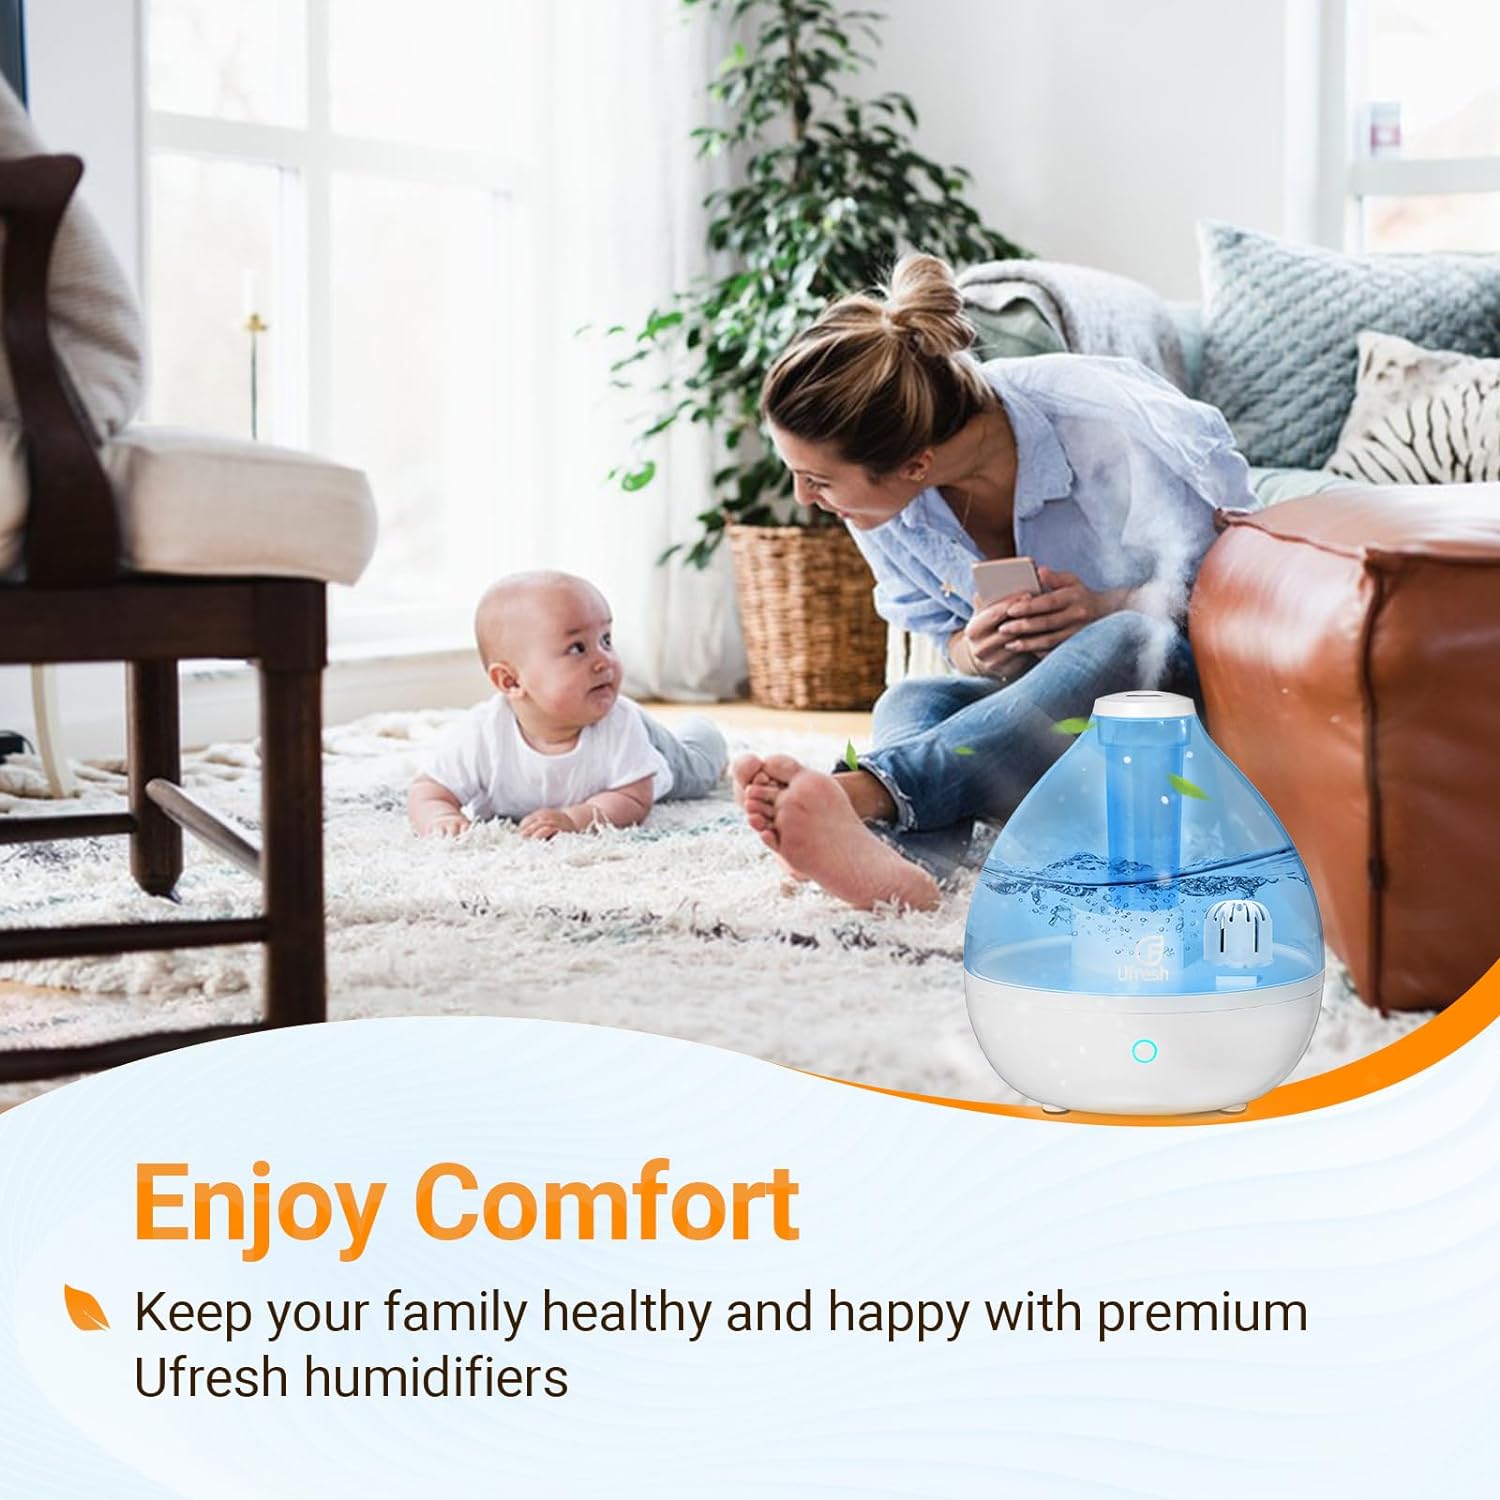 Ufresh Cool Mist Humidifiers for Home Bedroom Large Room, Small Vaporizers for Babies Kids Nursery Plants with Touch Control, 2.6L(0.7 Gal), Auto Shut-off, Whisper-Quiet